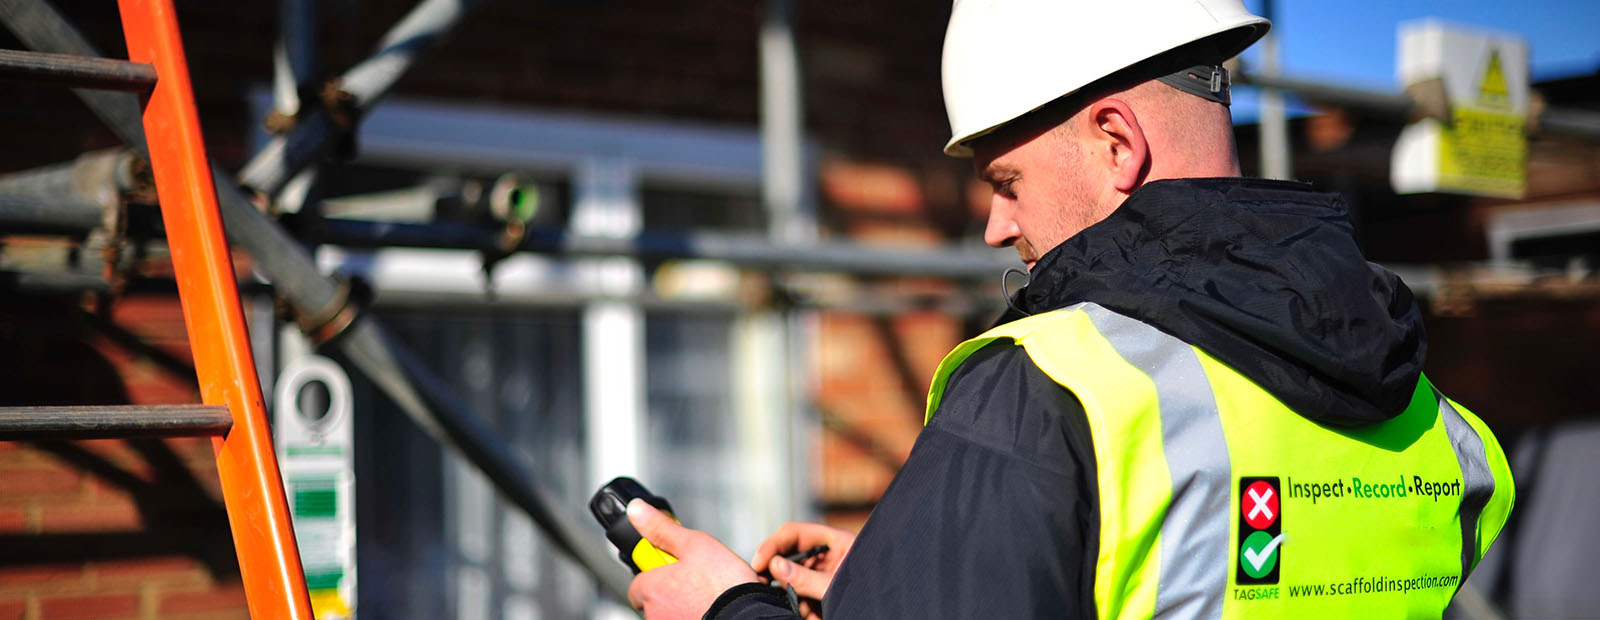 TAGSAFE, an independent scaffold inspection service